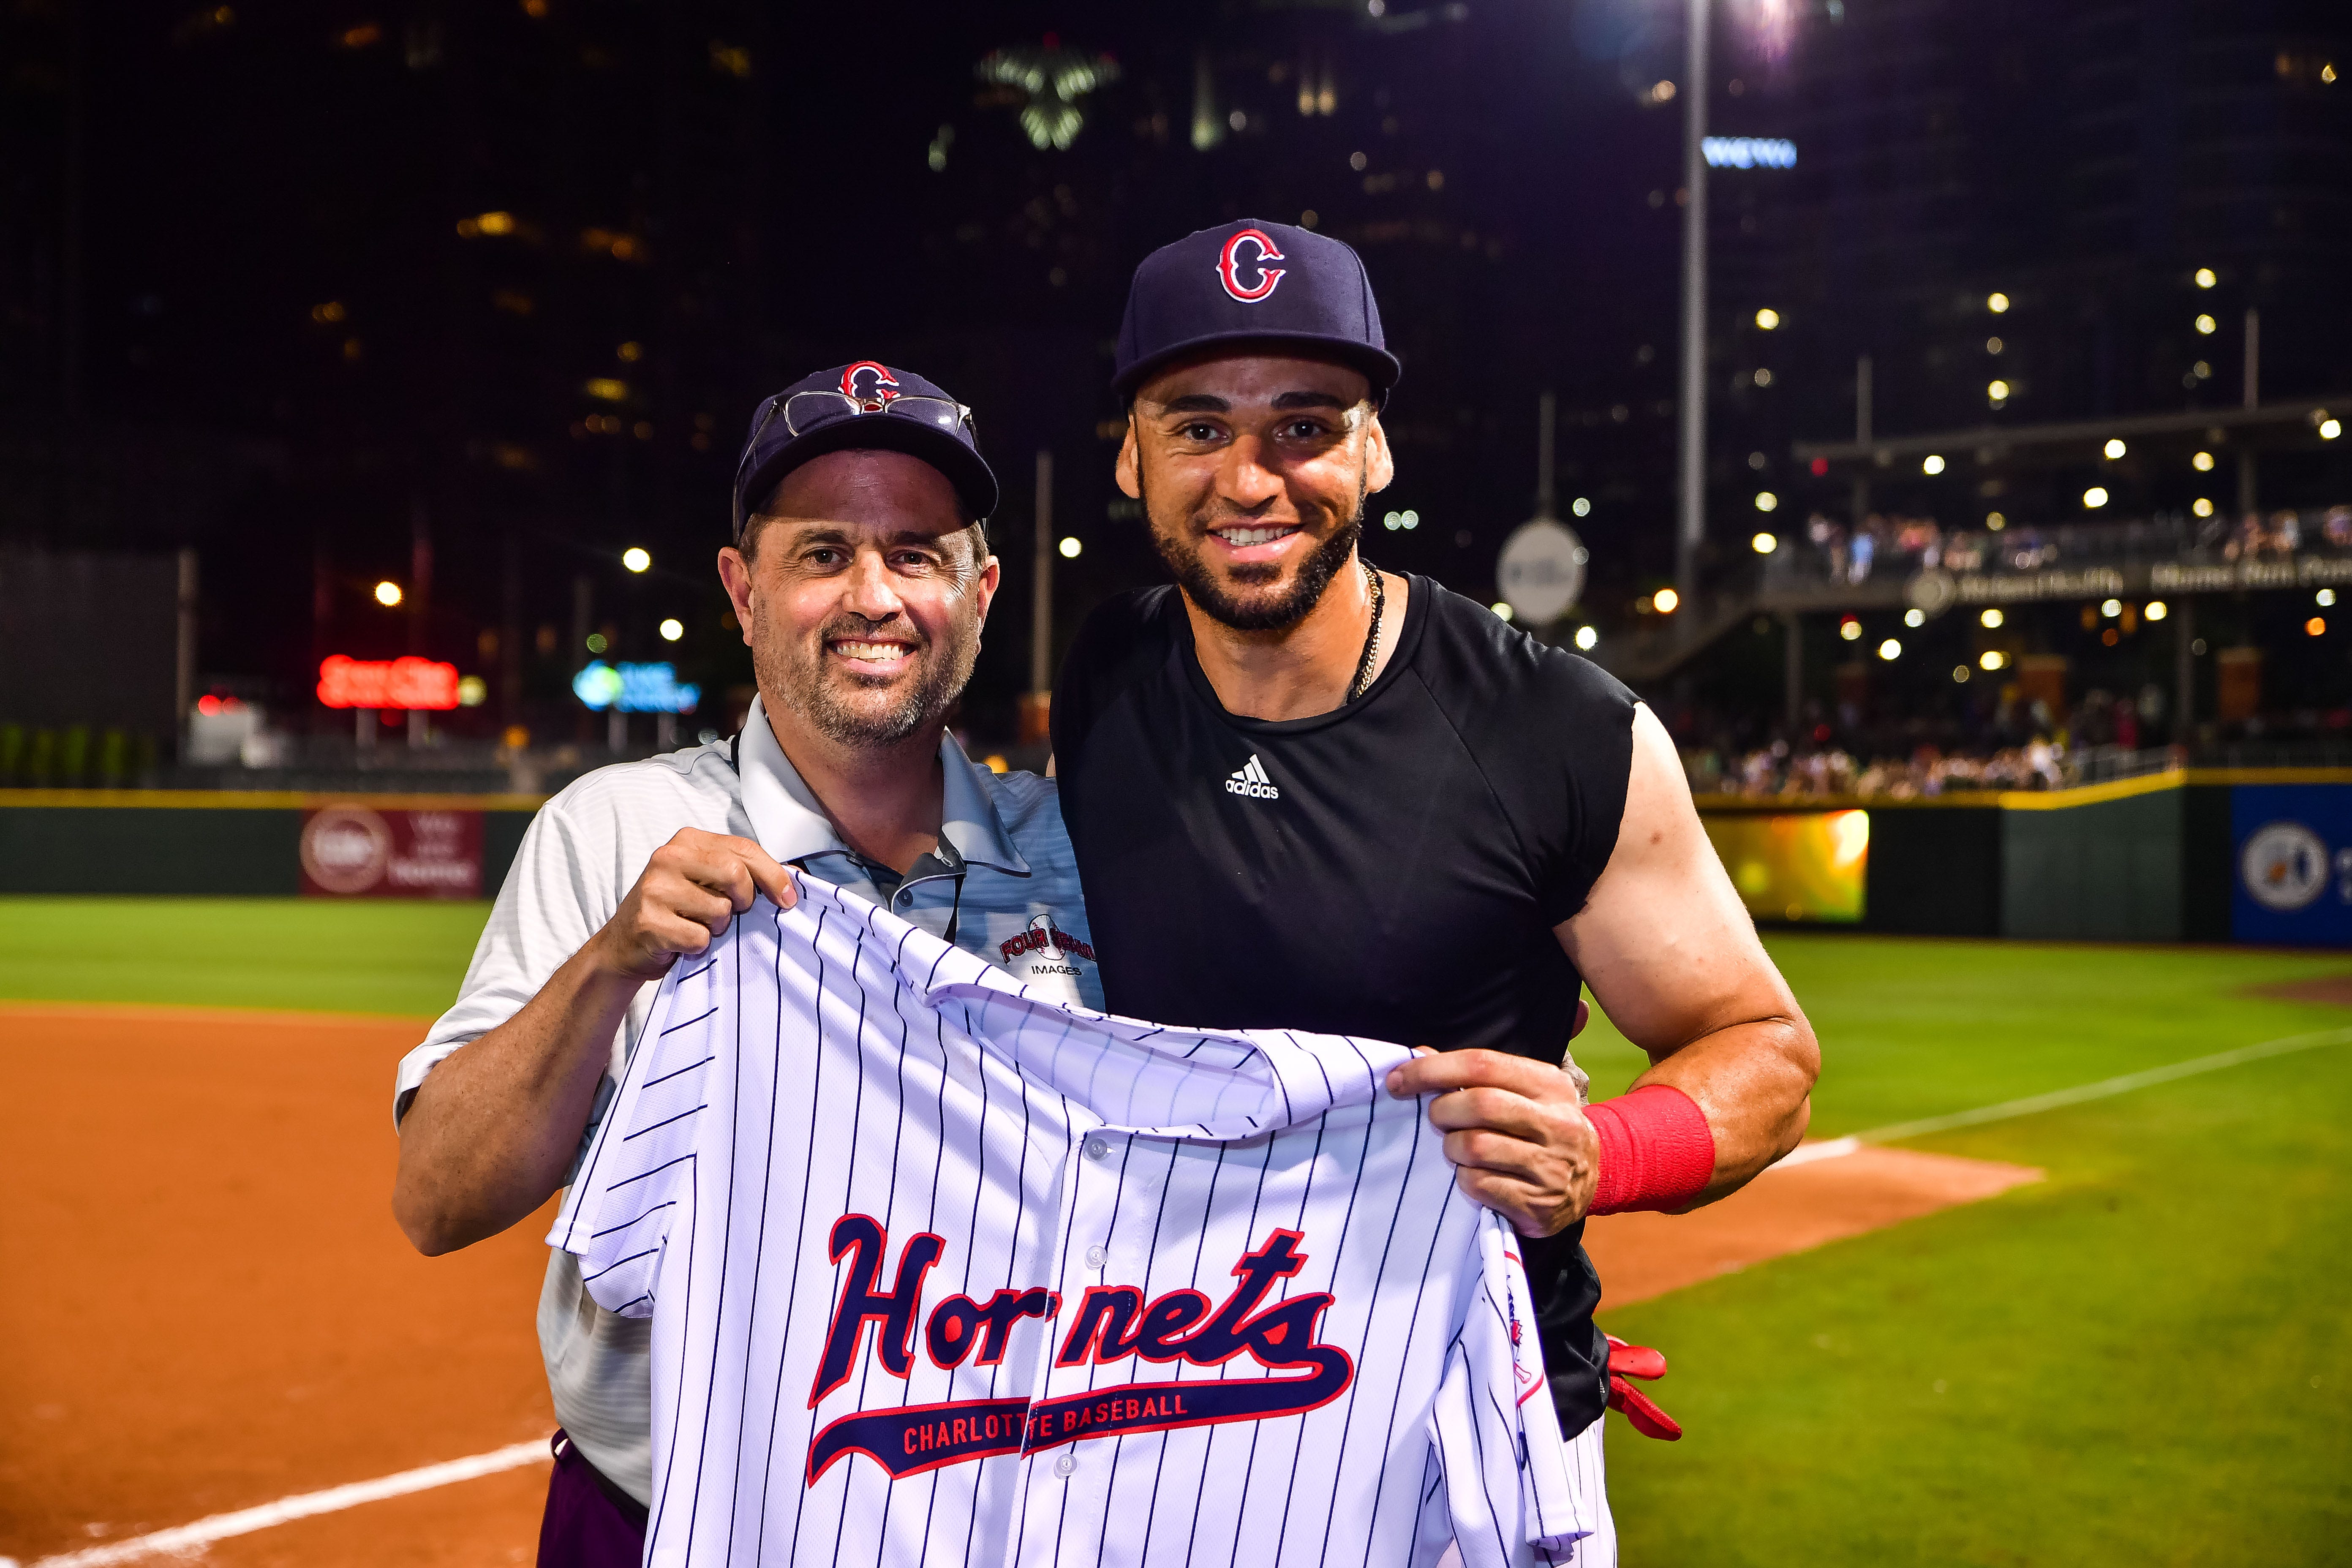 50th Anniversary — 1969 HORNETS. The Charlotte Knights honored the